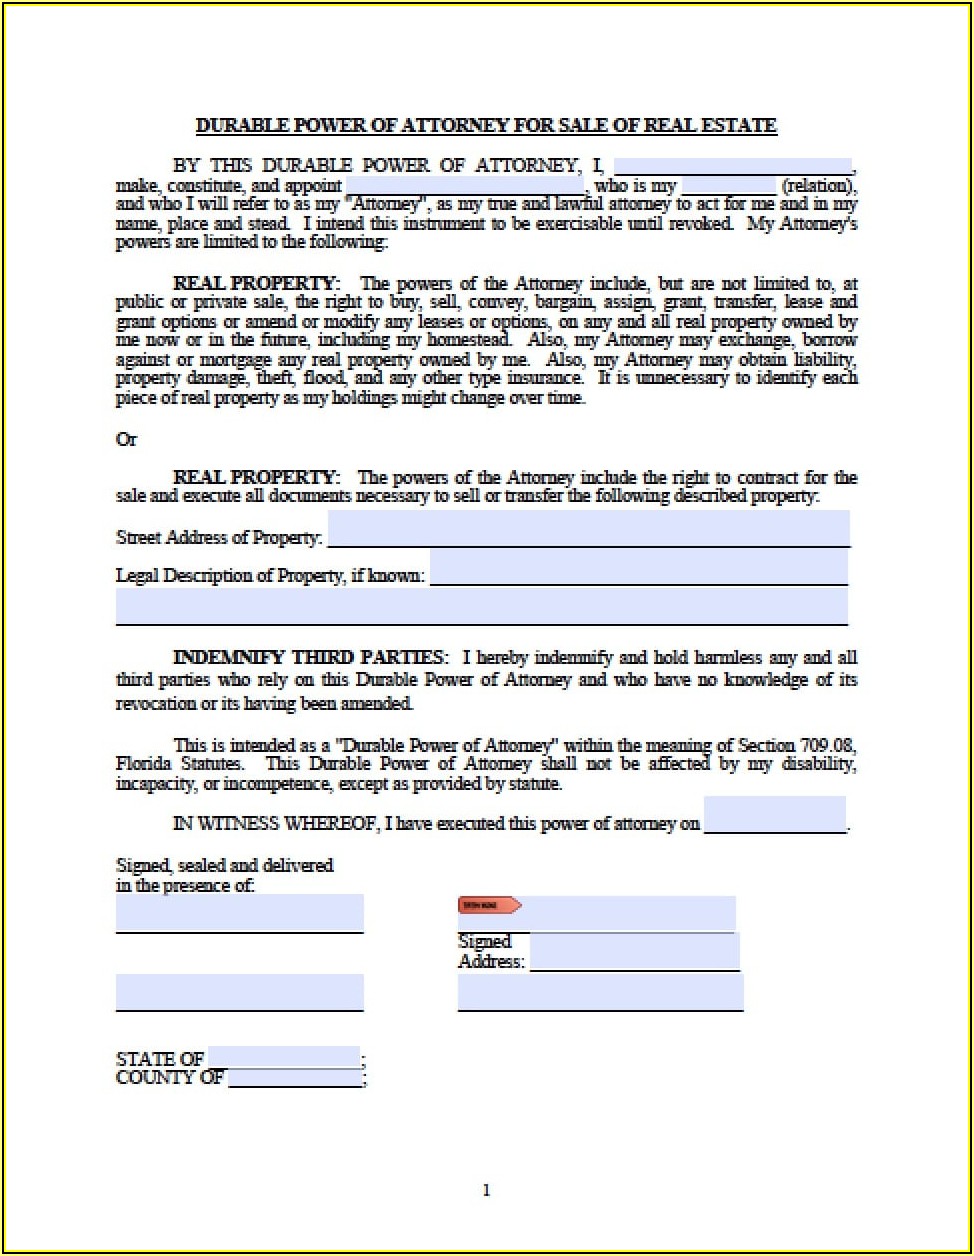 Florida Real Estate Transfer Tax Forms